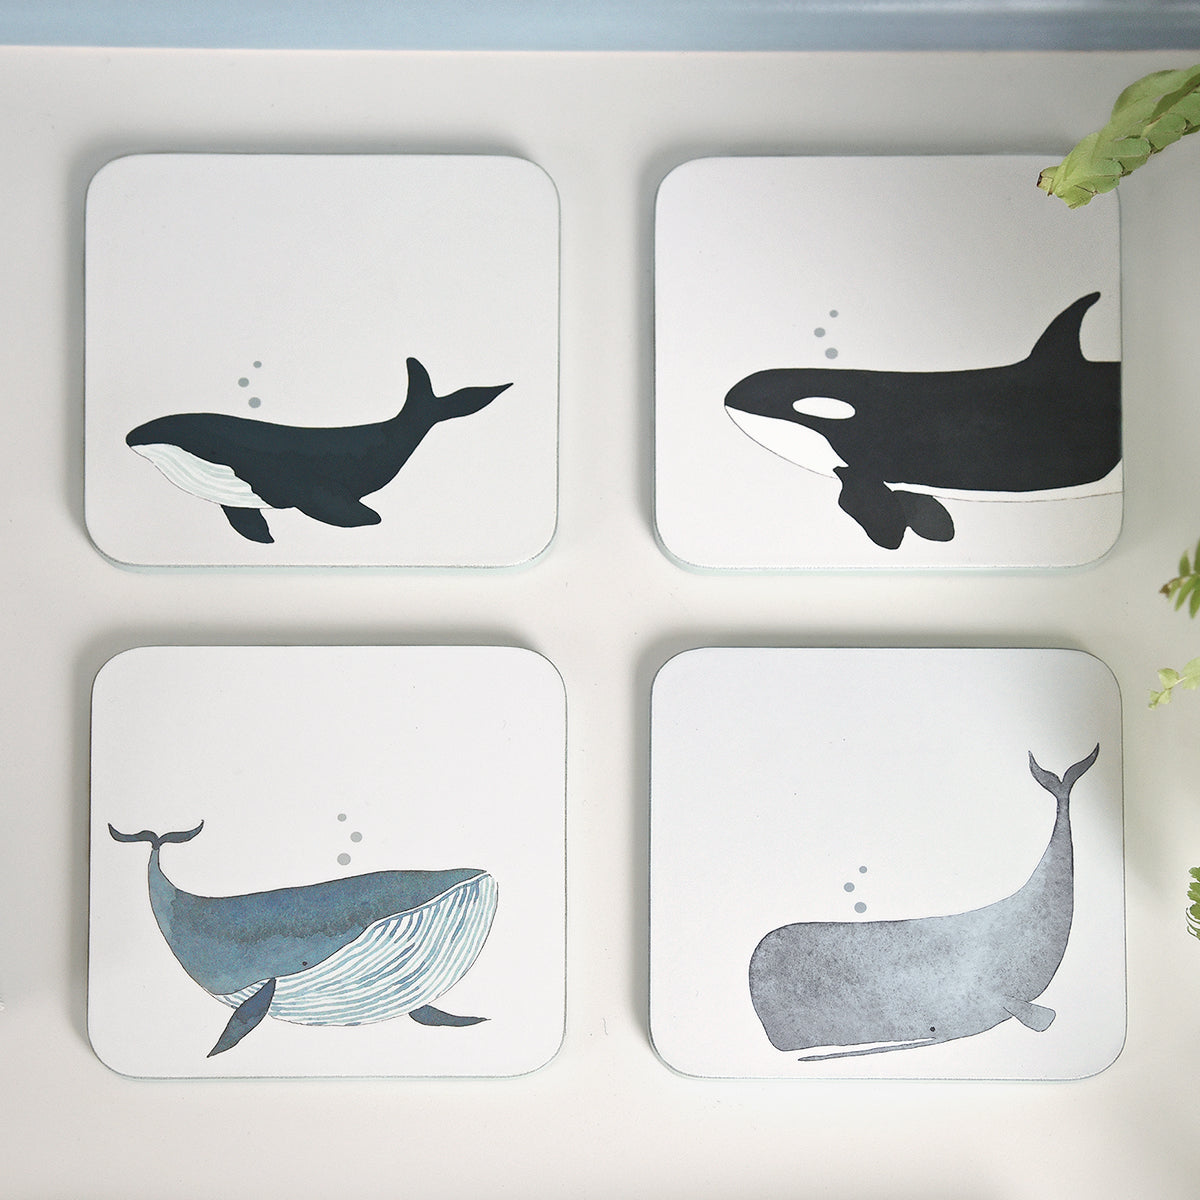 Whales Coasters (Set of 4)